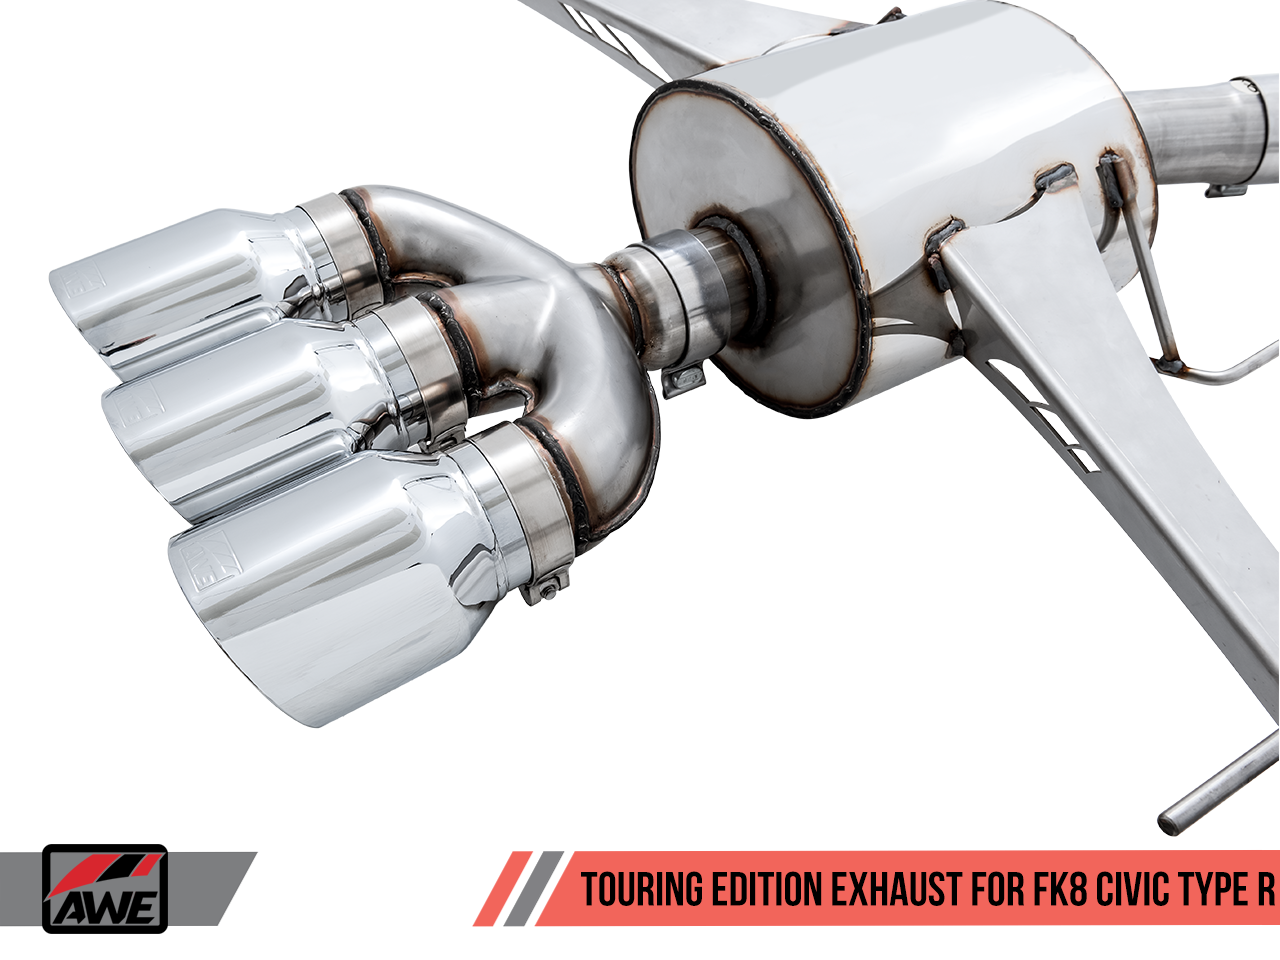 AWE Touring Edition Exhaust for FK8 Civic Type R (includes Front Pipe) - Triple Chrome Silver Tips - 0